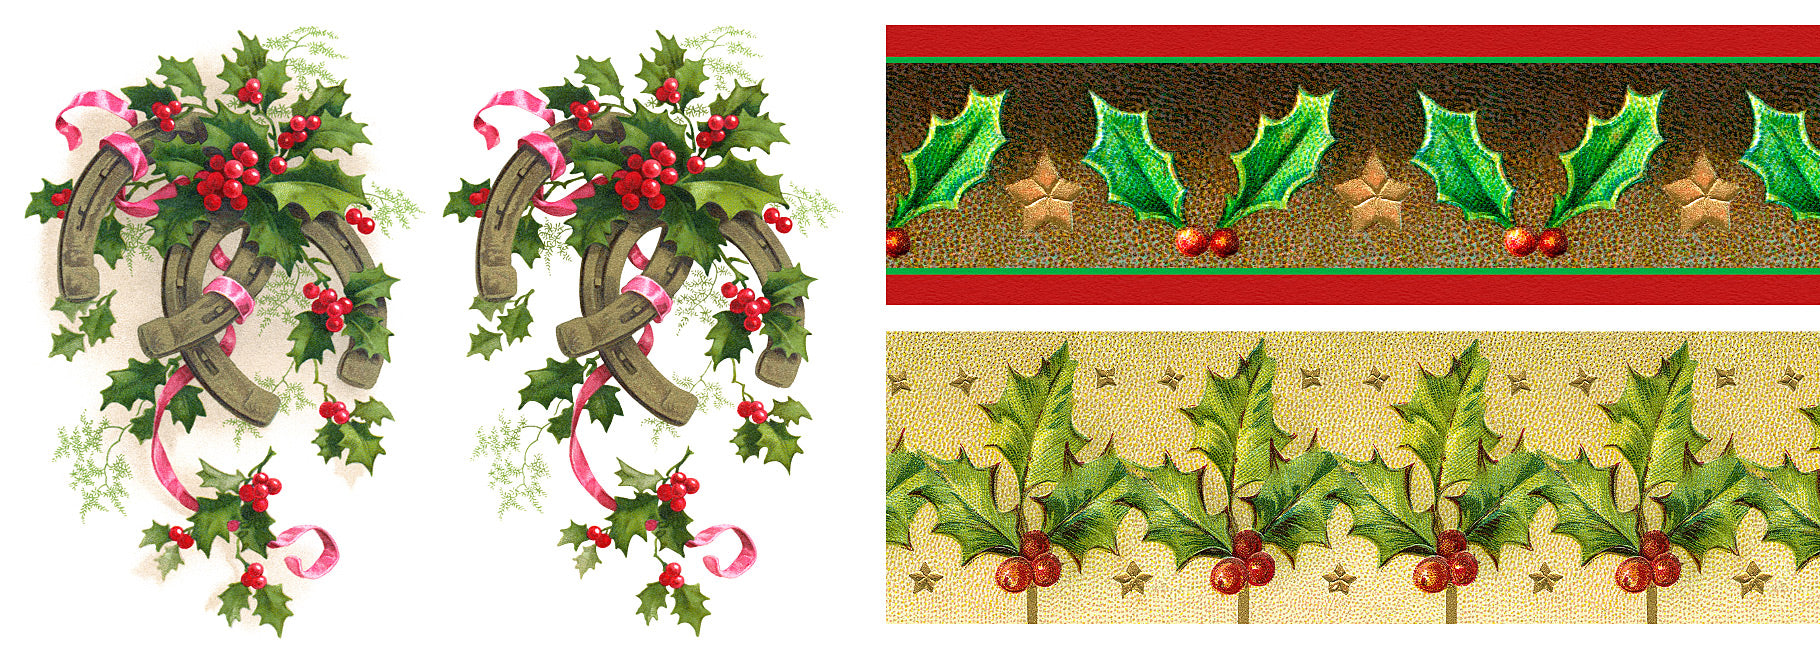 Vintage Christmas holly illustrations and patterns digital graphics